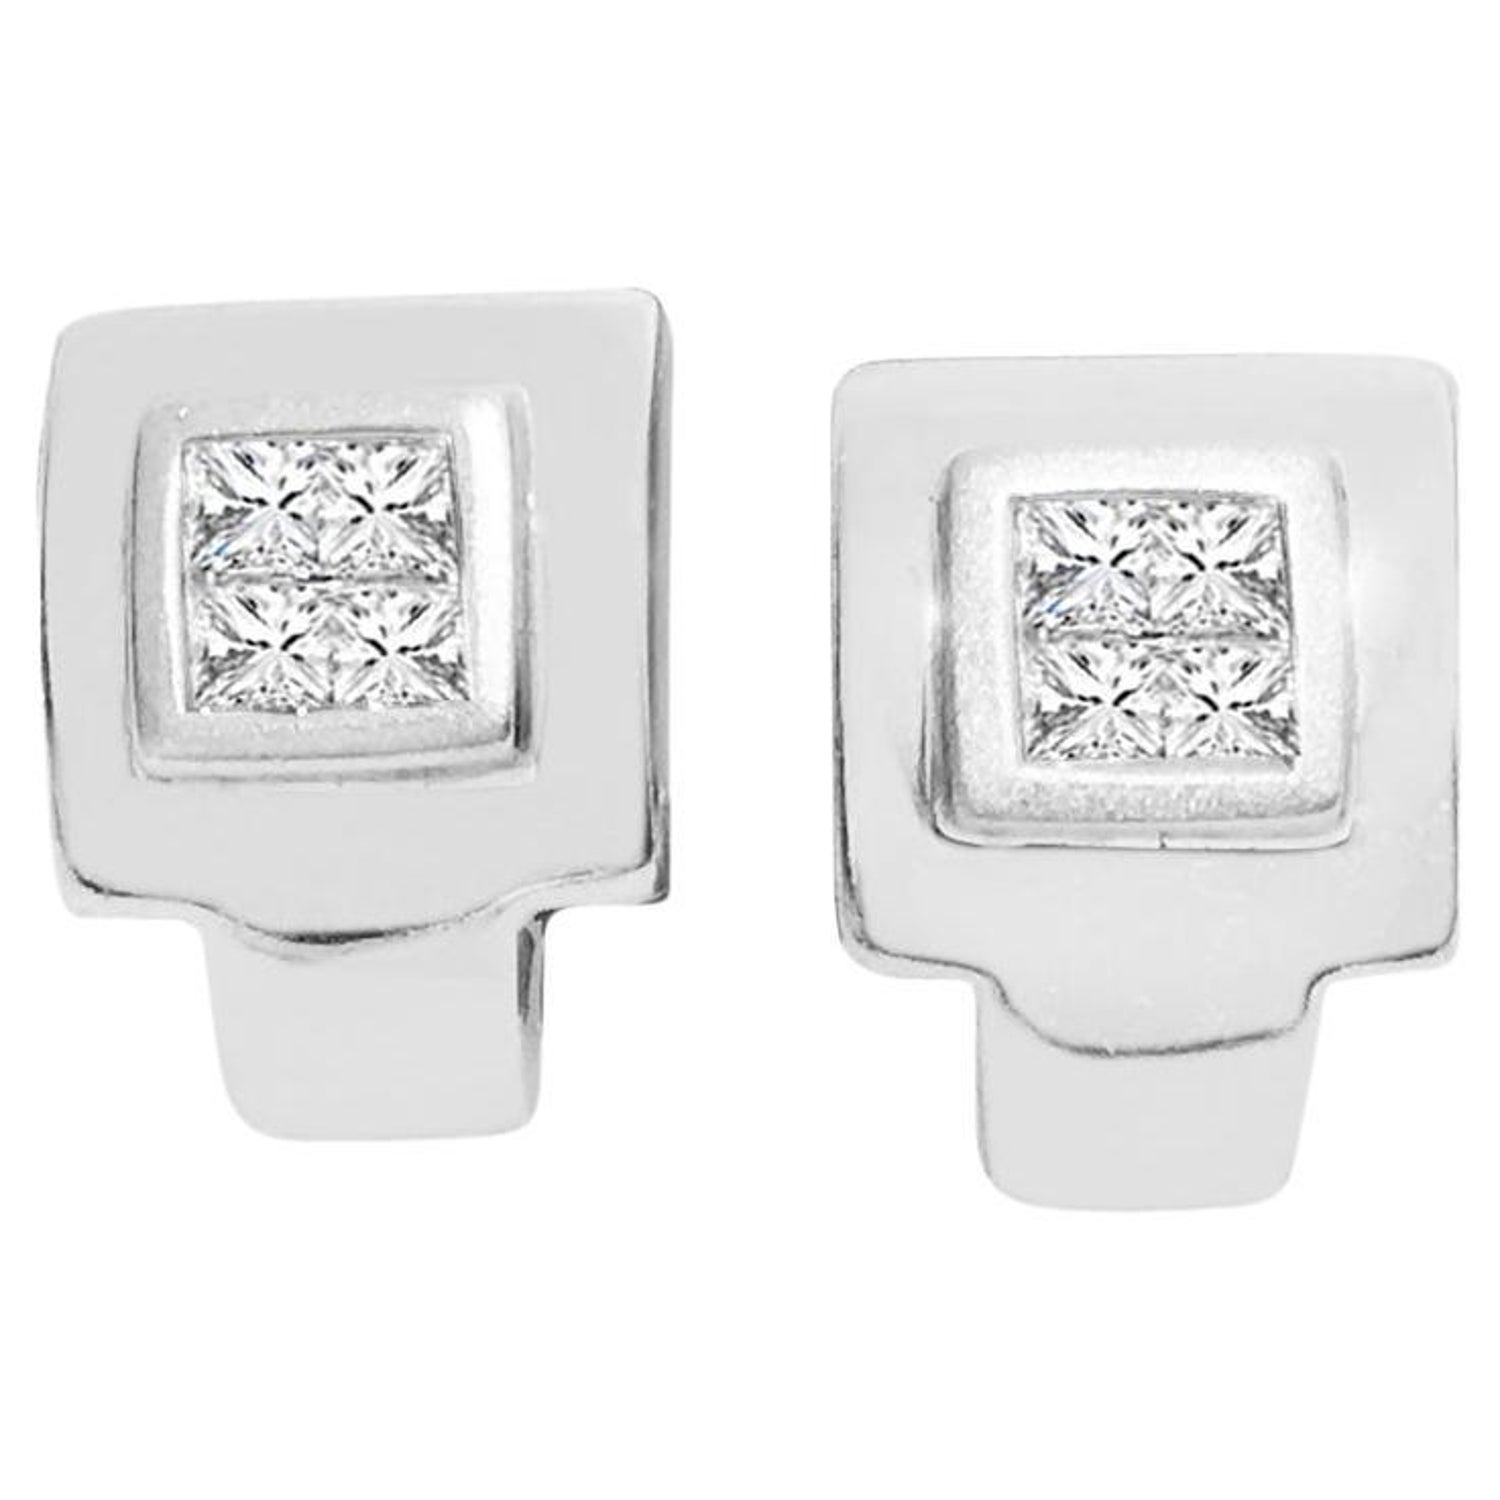 Princess Cut Diamond in 14K White Gold Stud Earrings For Sale at 1stDibs